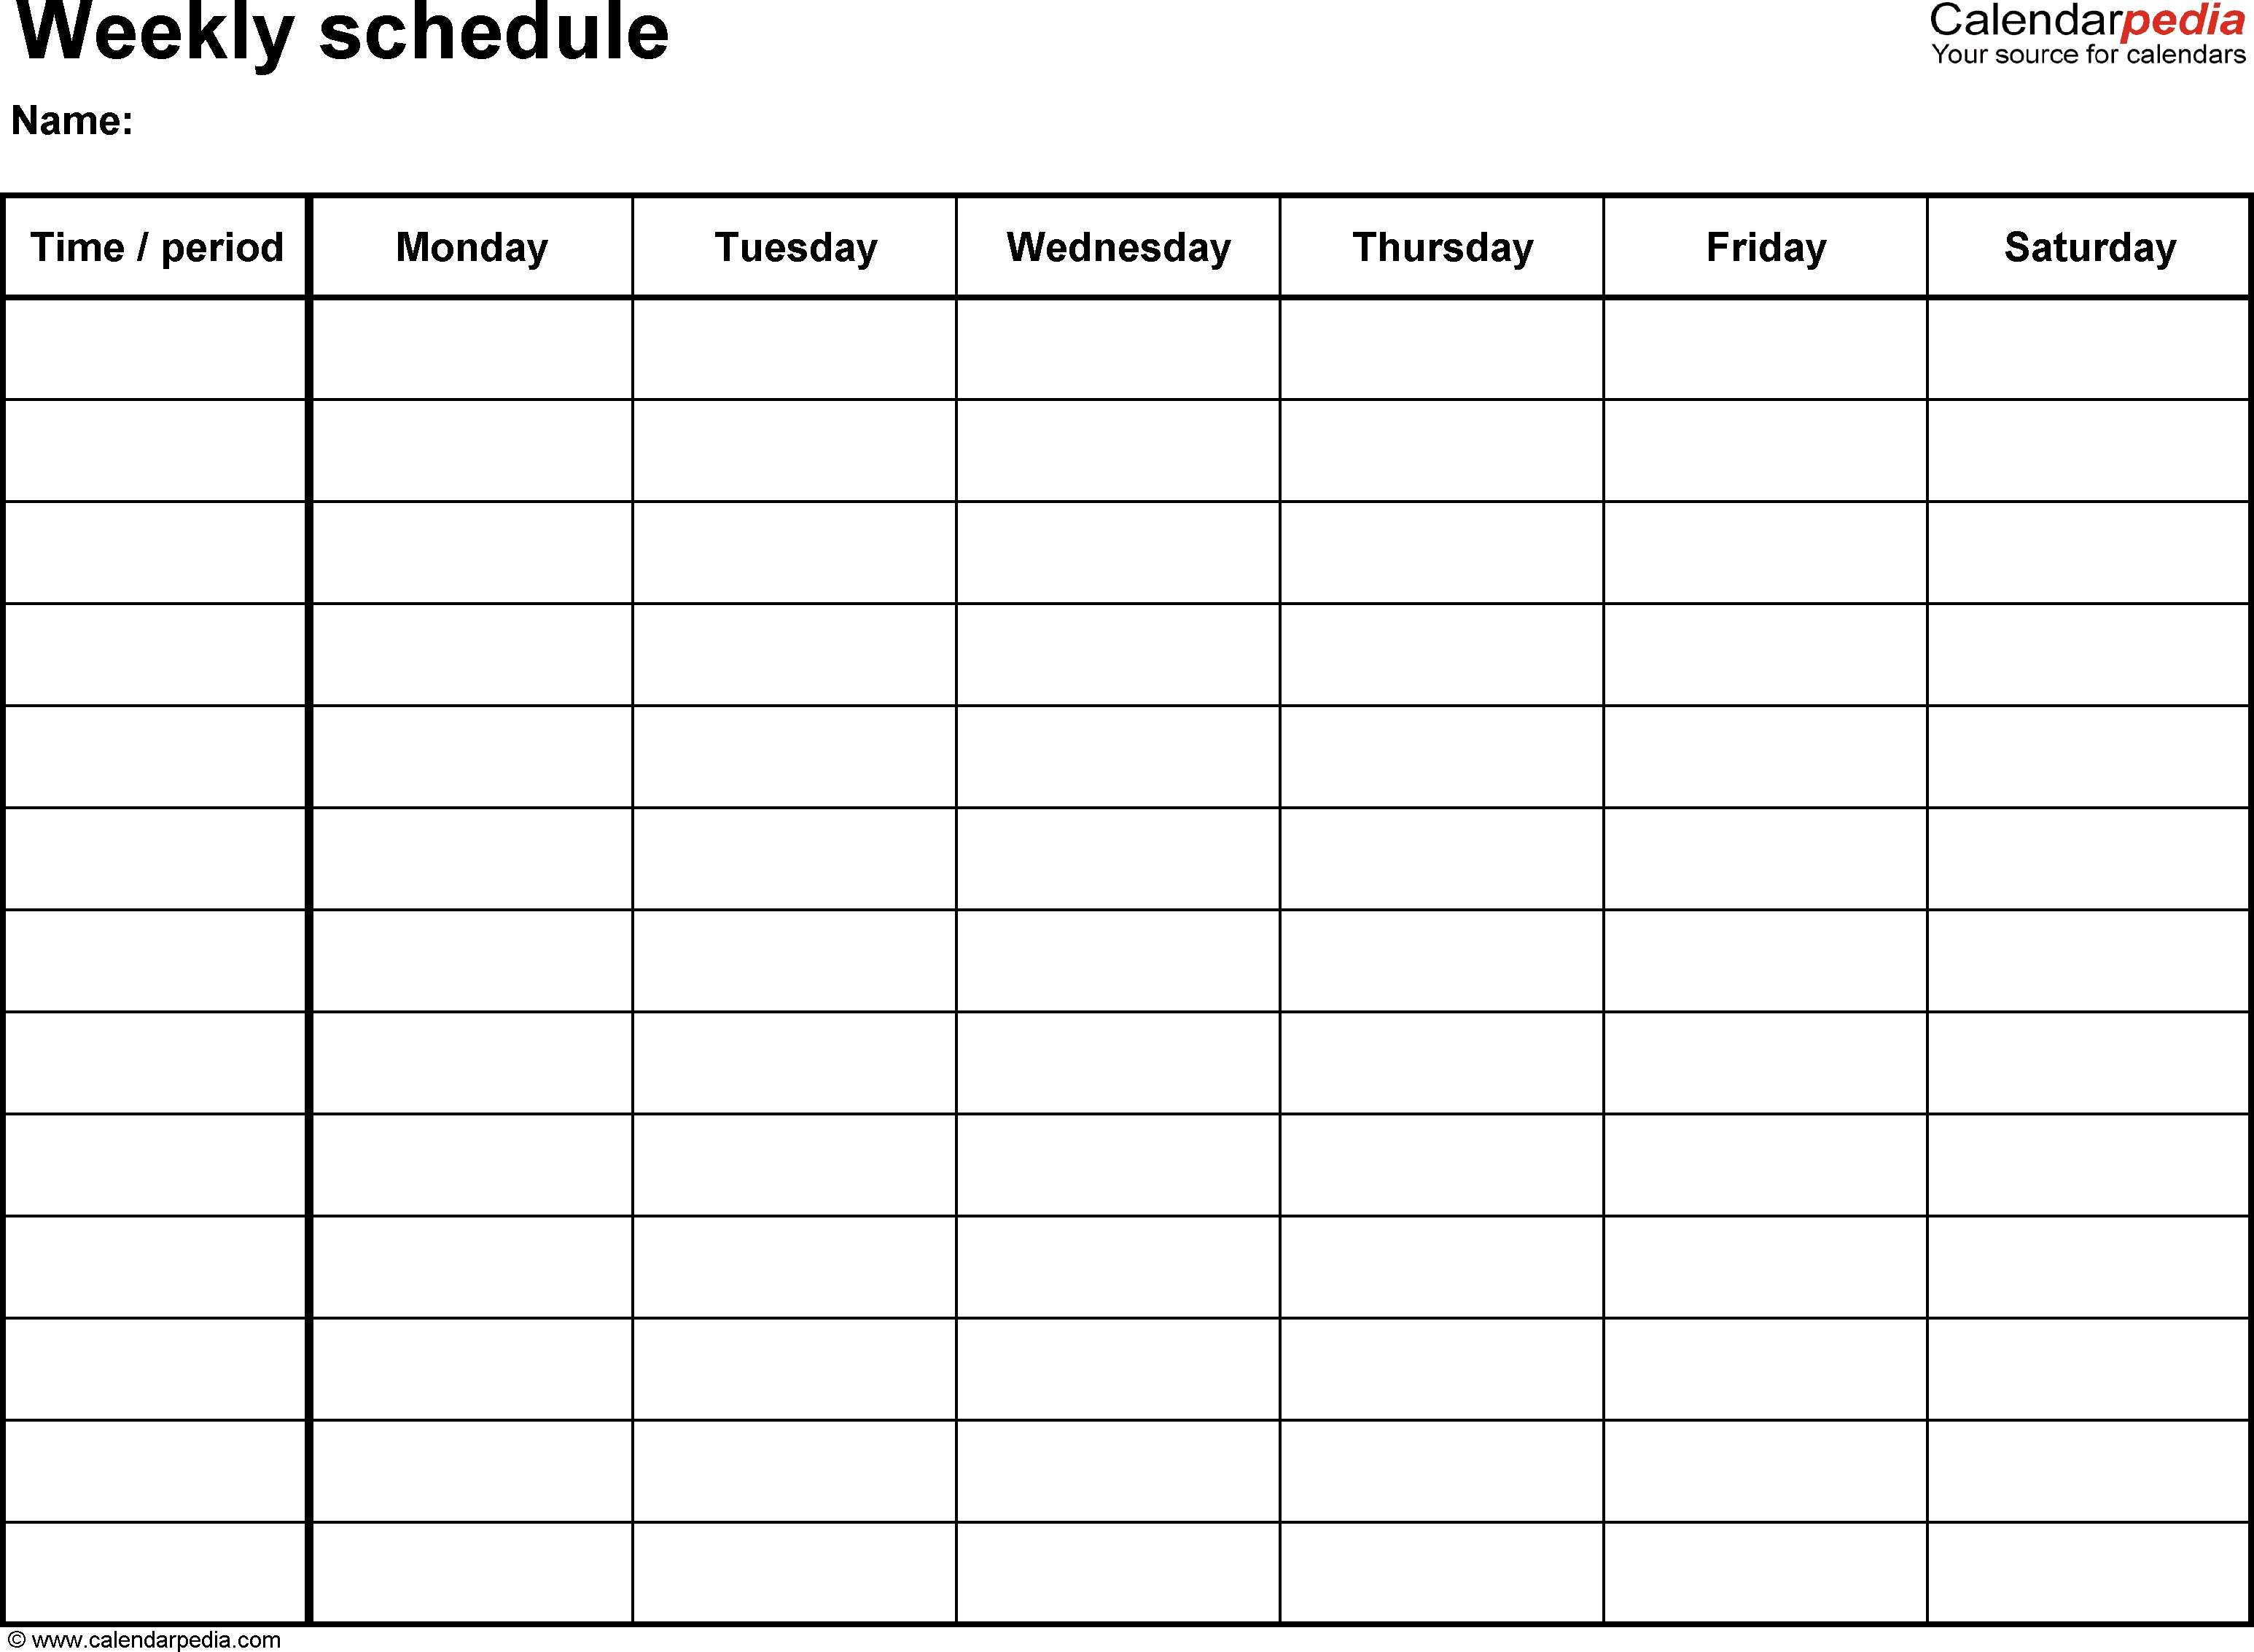 Free Weekly Schedule Templates For Pdf - 18 Templates with Printable Weekly Planner For The Week